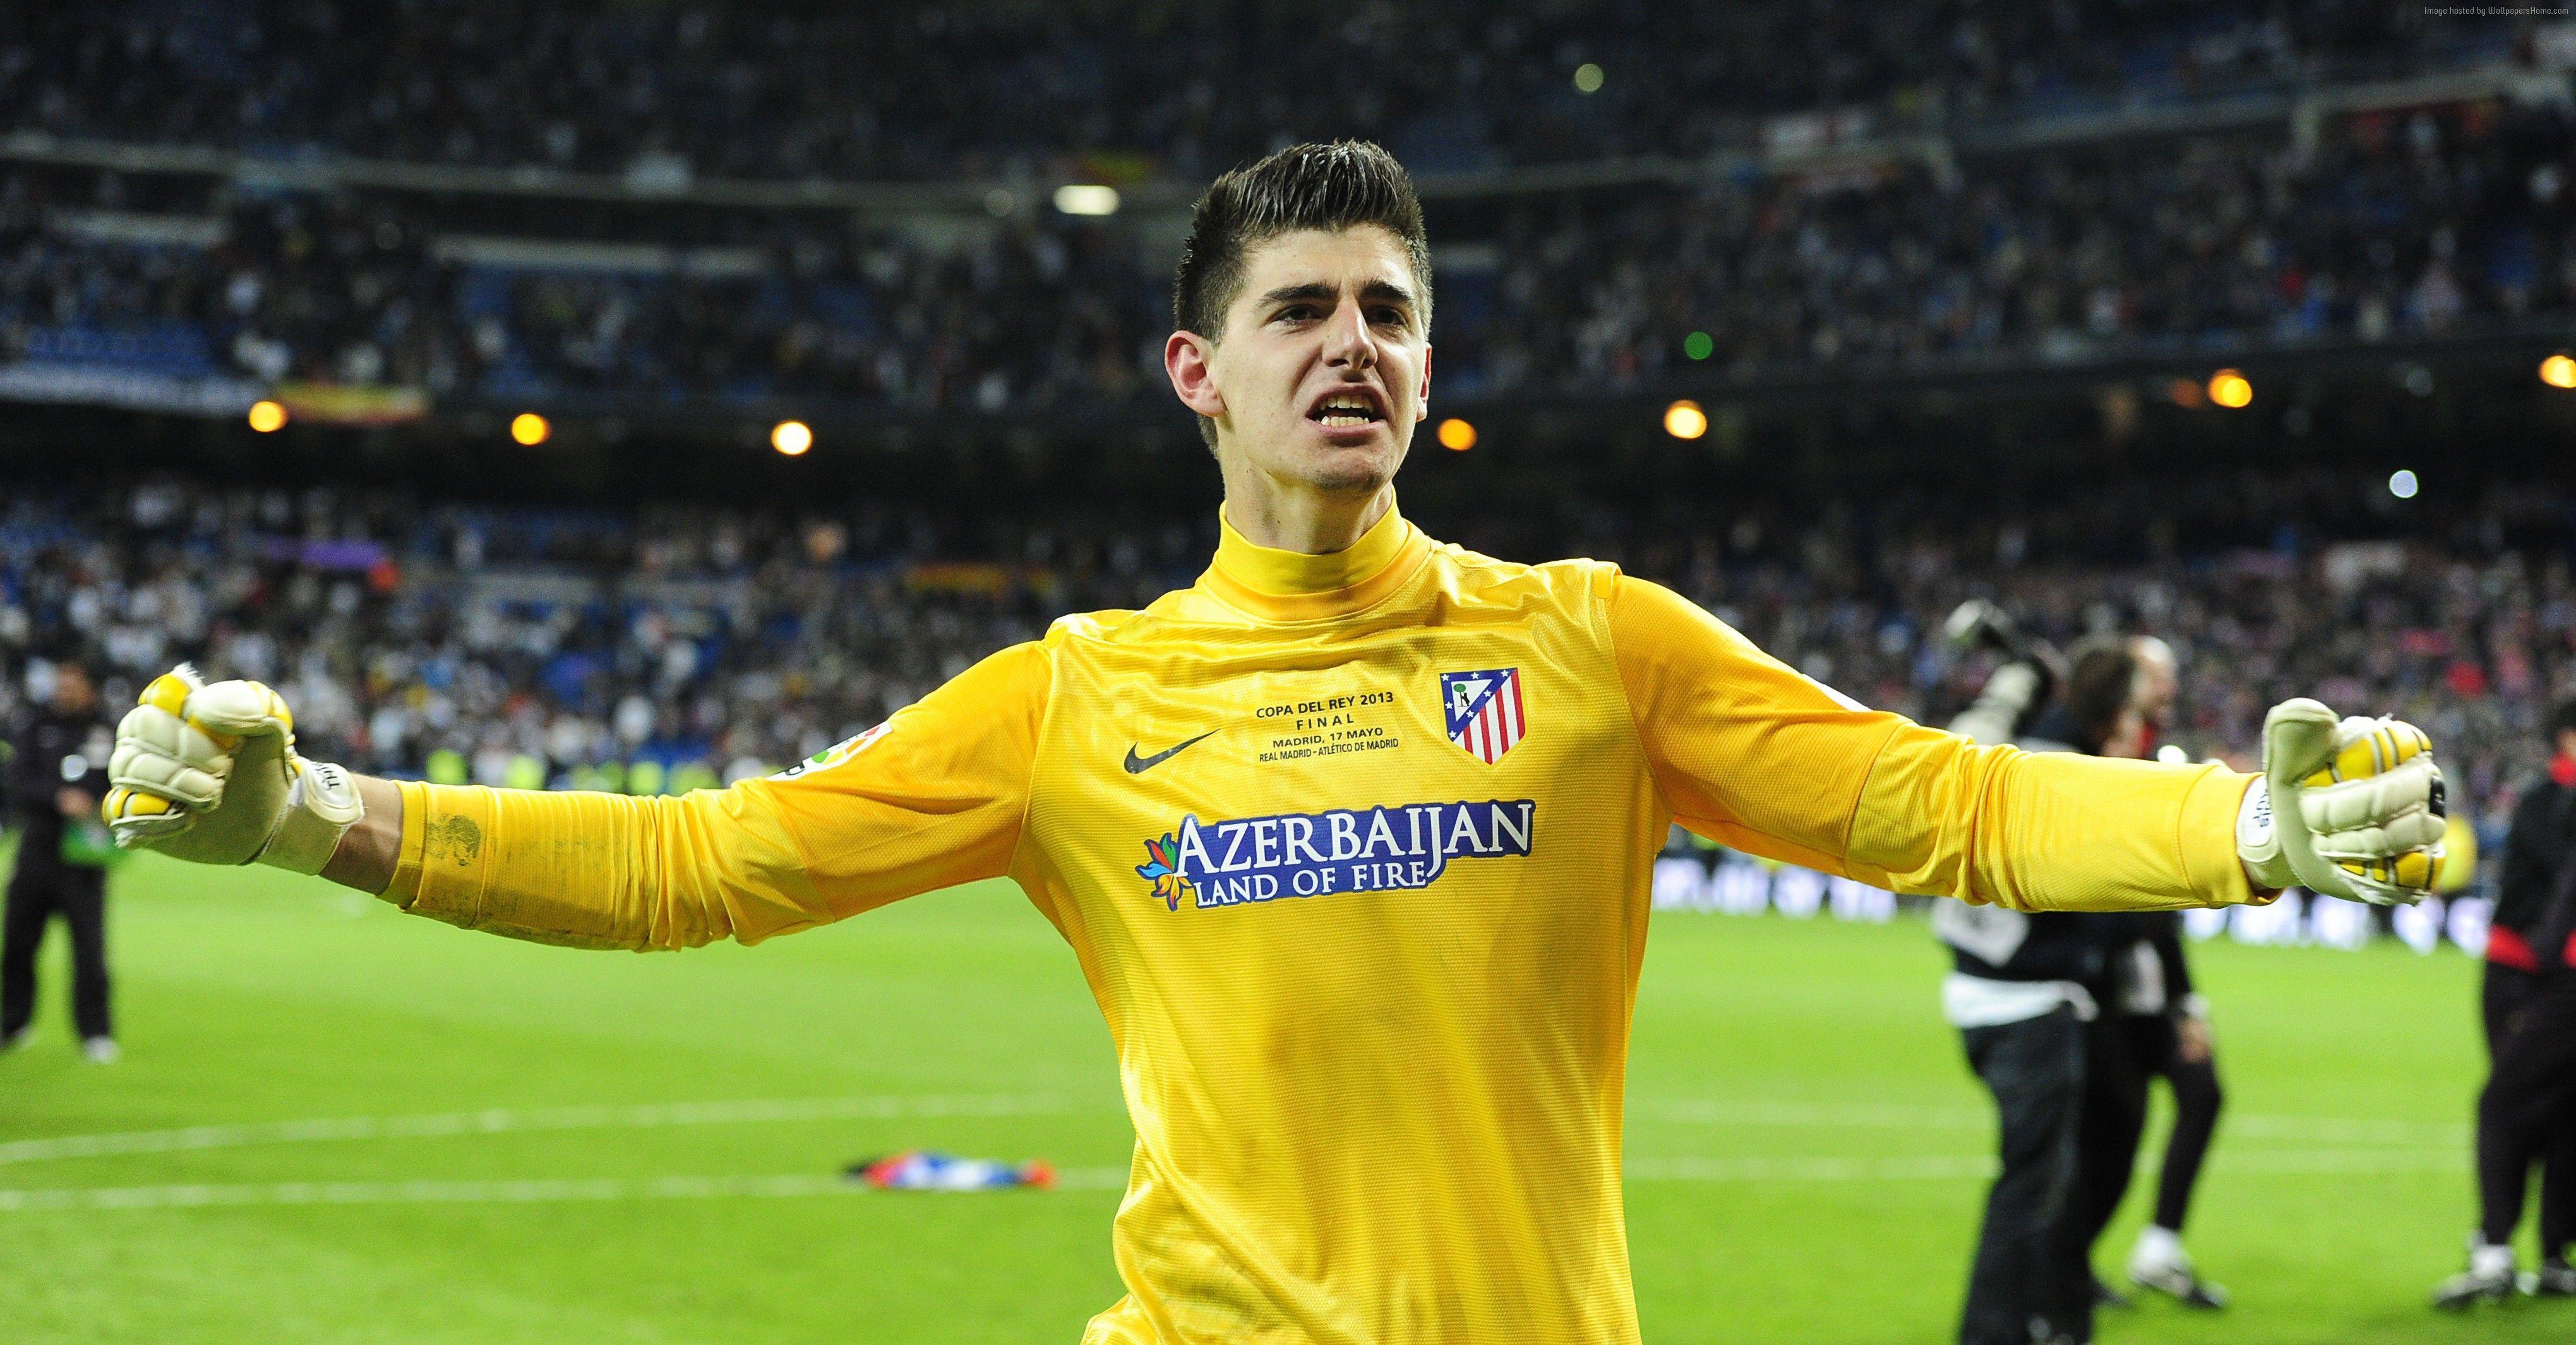 Wallpaper Football, Thibaut Courtois, soccer, The Best players